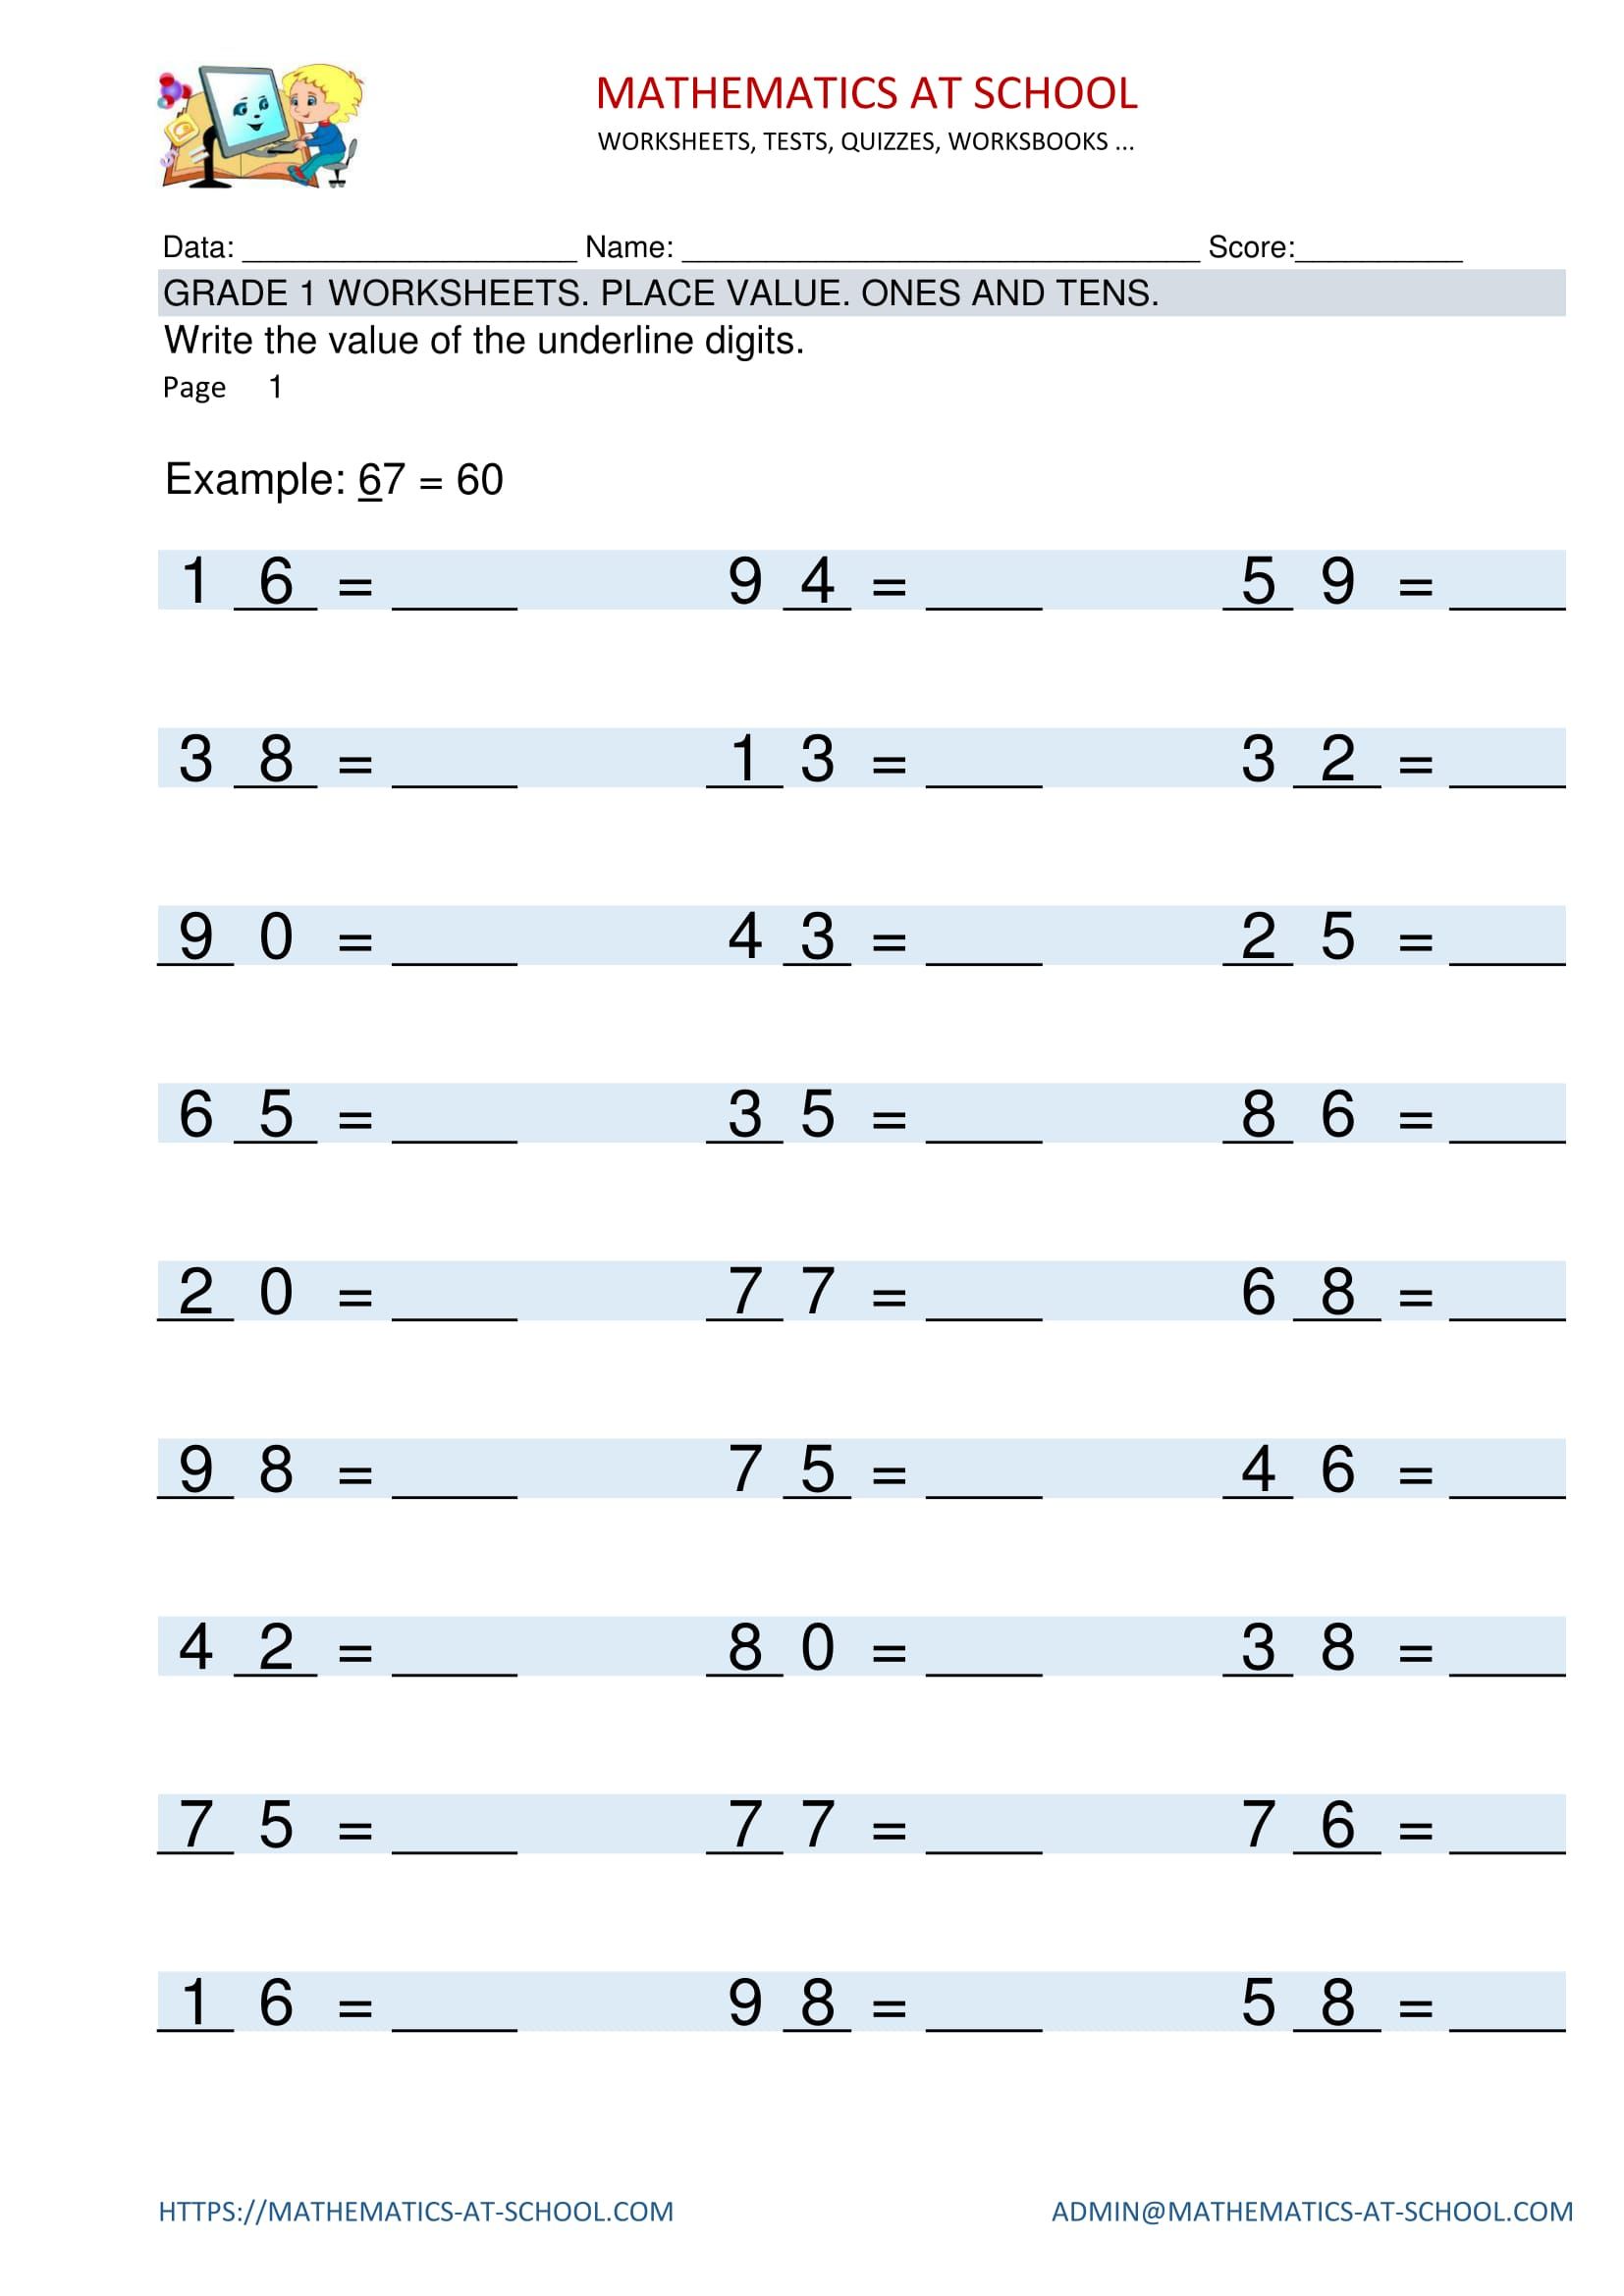 GRADE 1 WORKSHEETS Place value Identifying place value of digits, ones